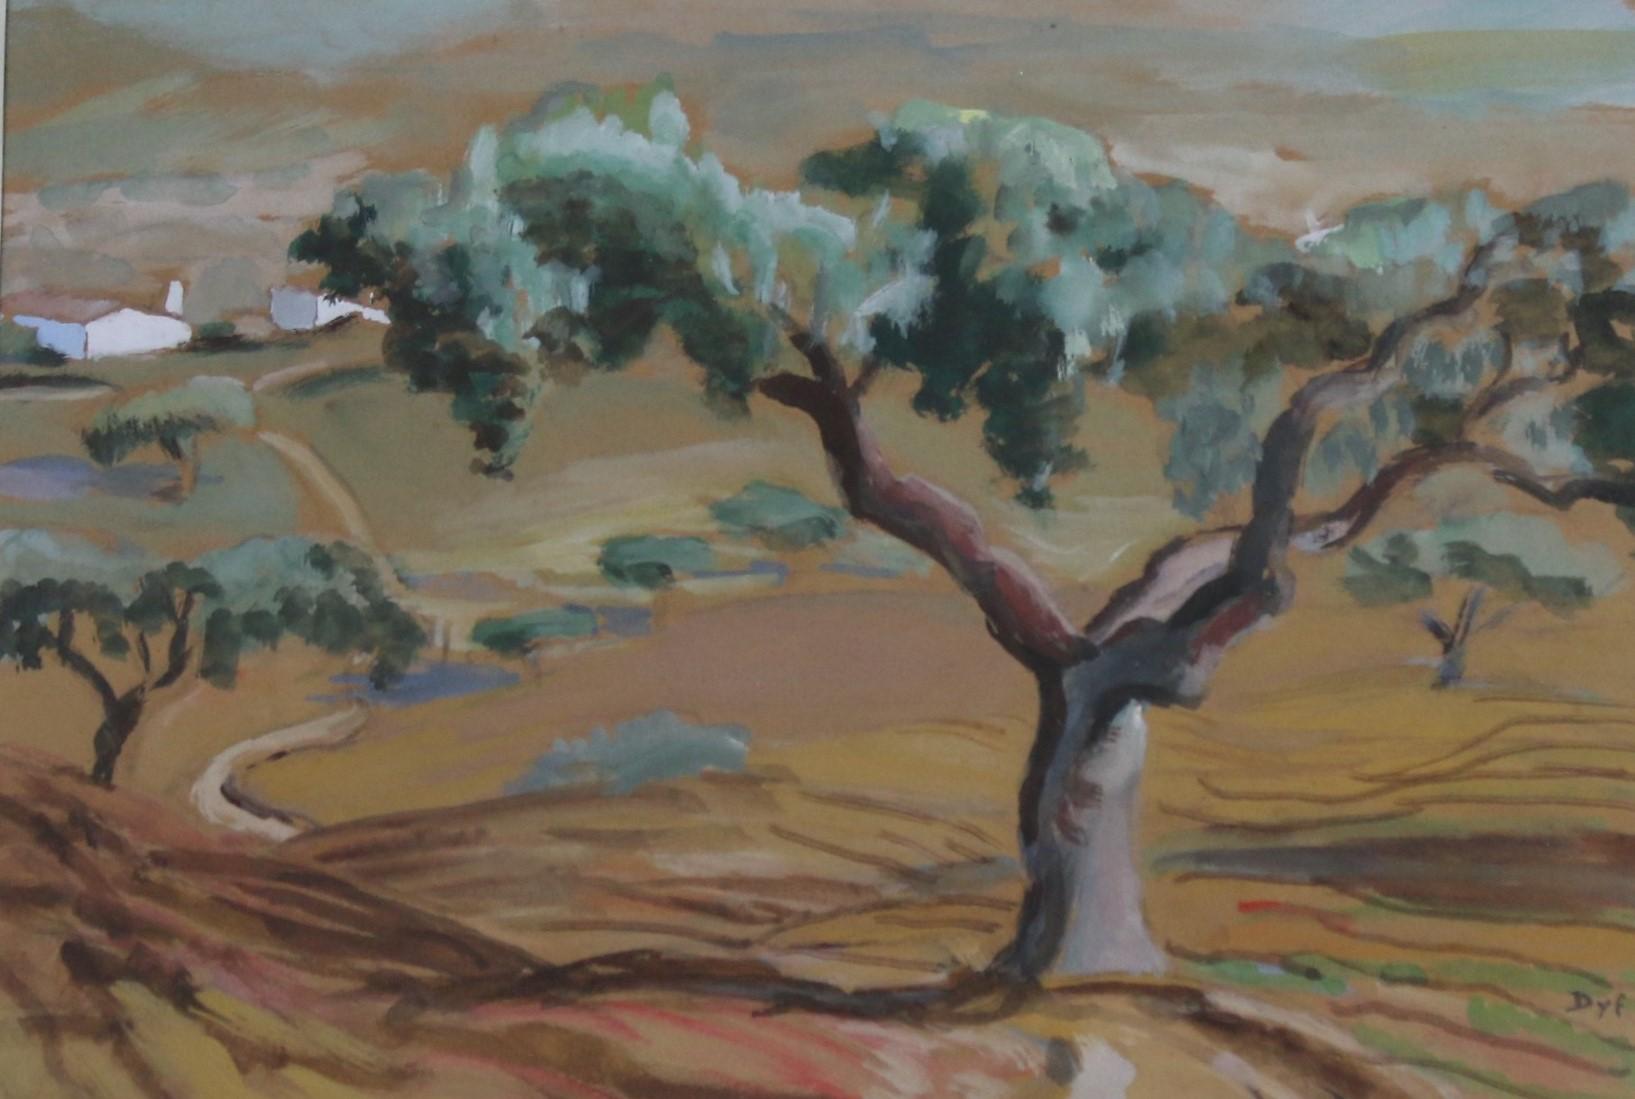 French olive groves landscape - Painting by Marcel Dyf